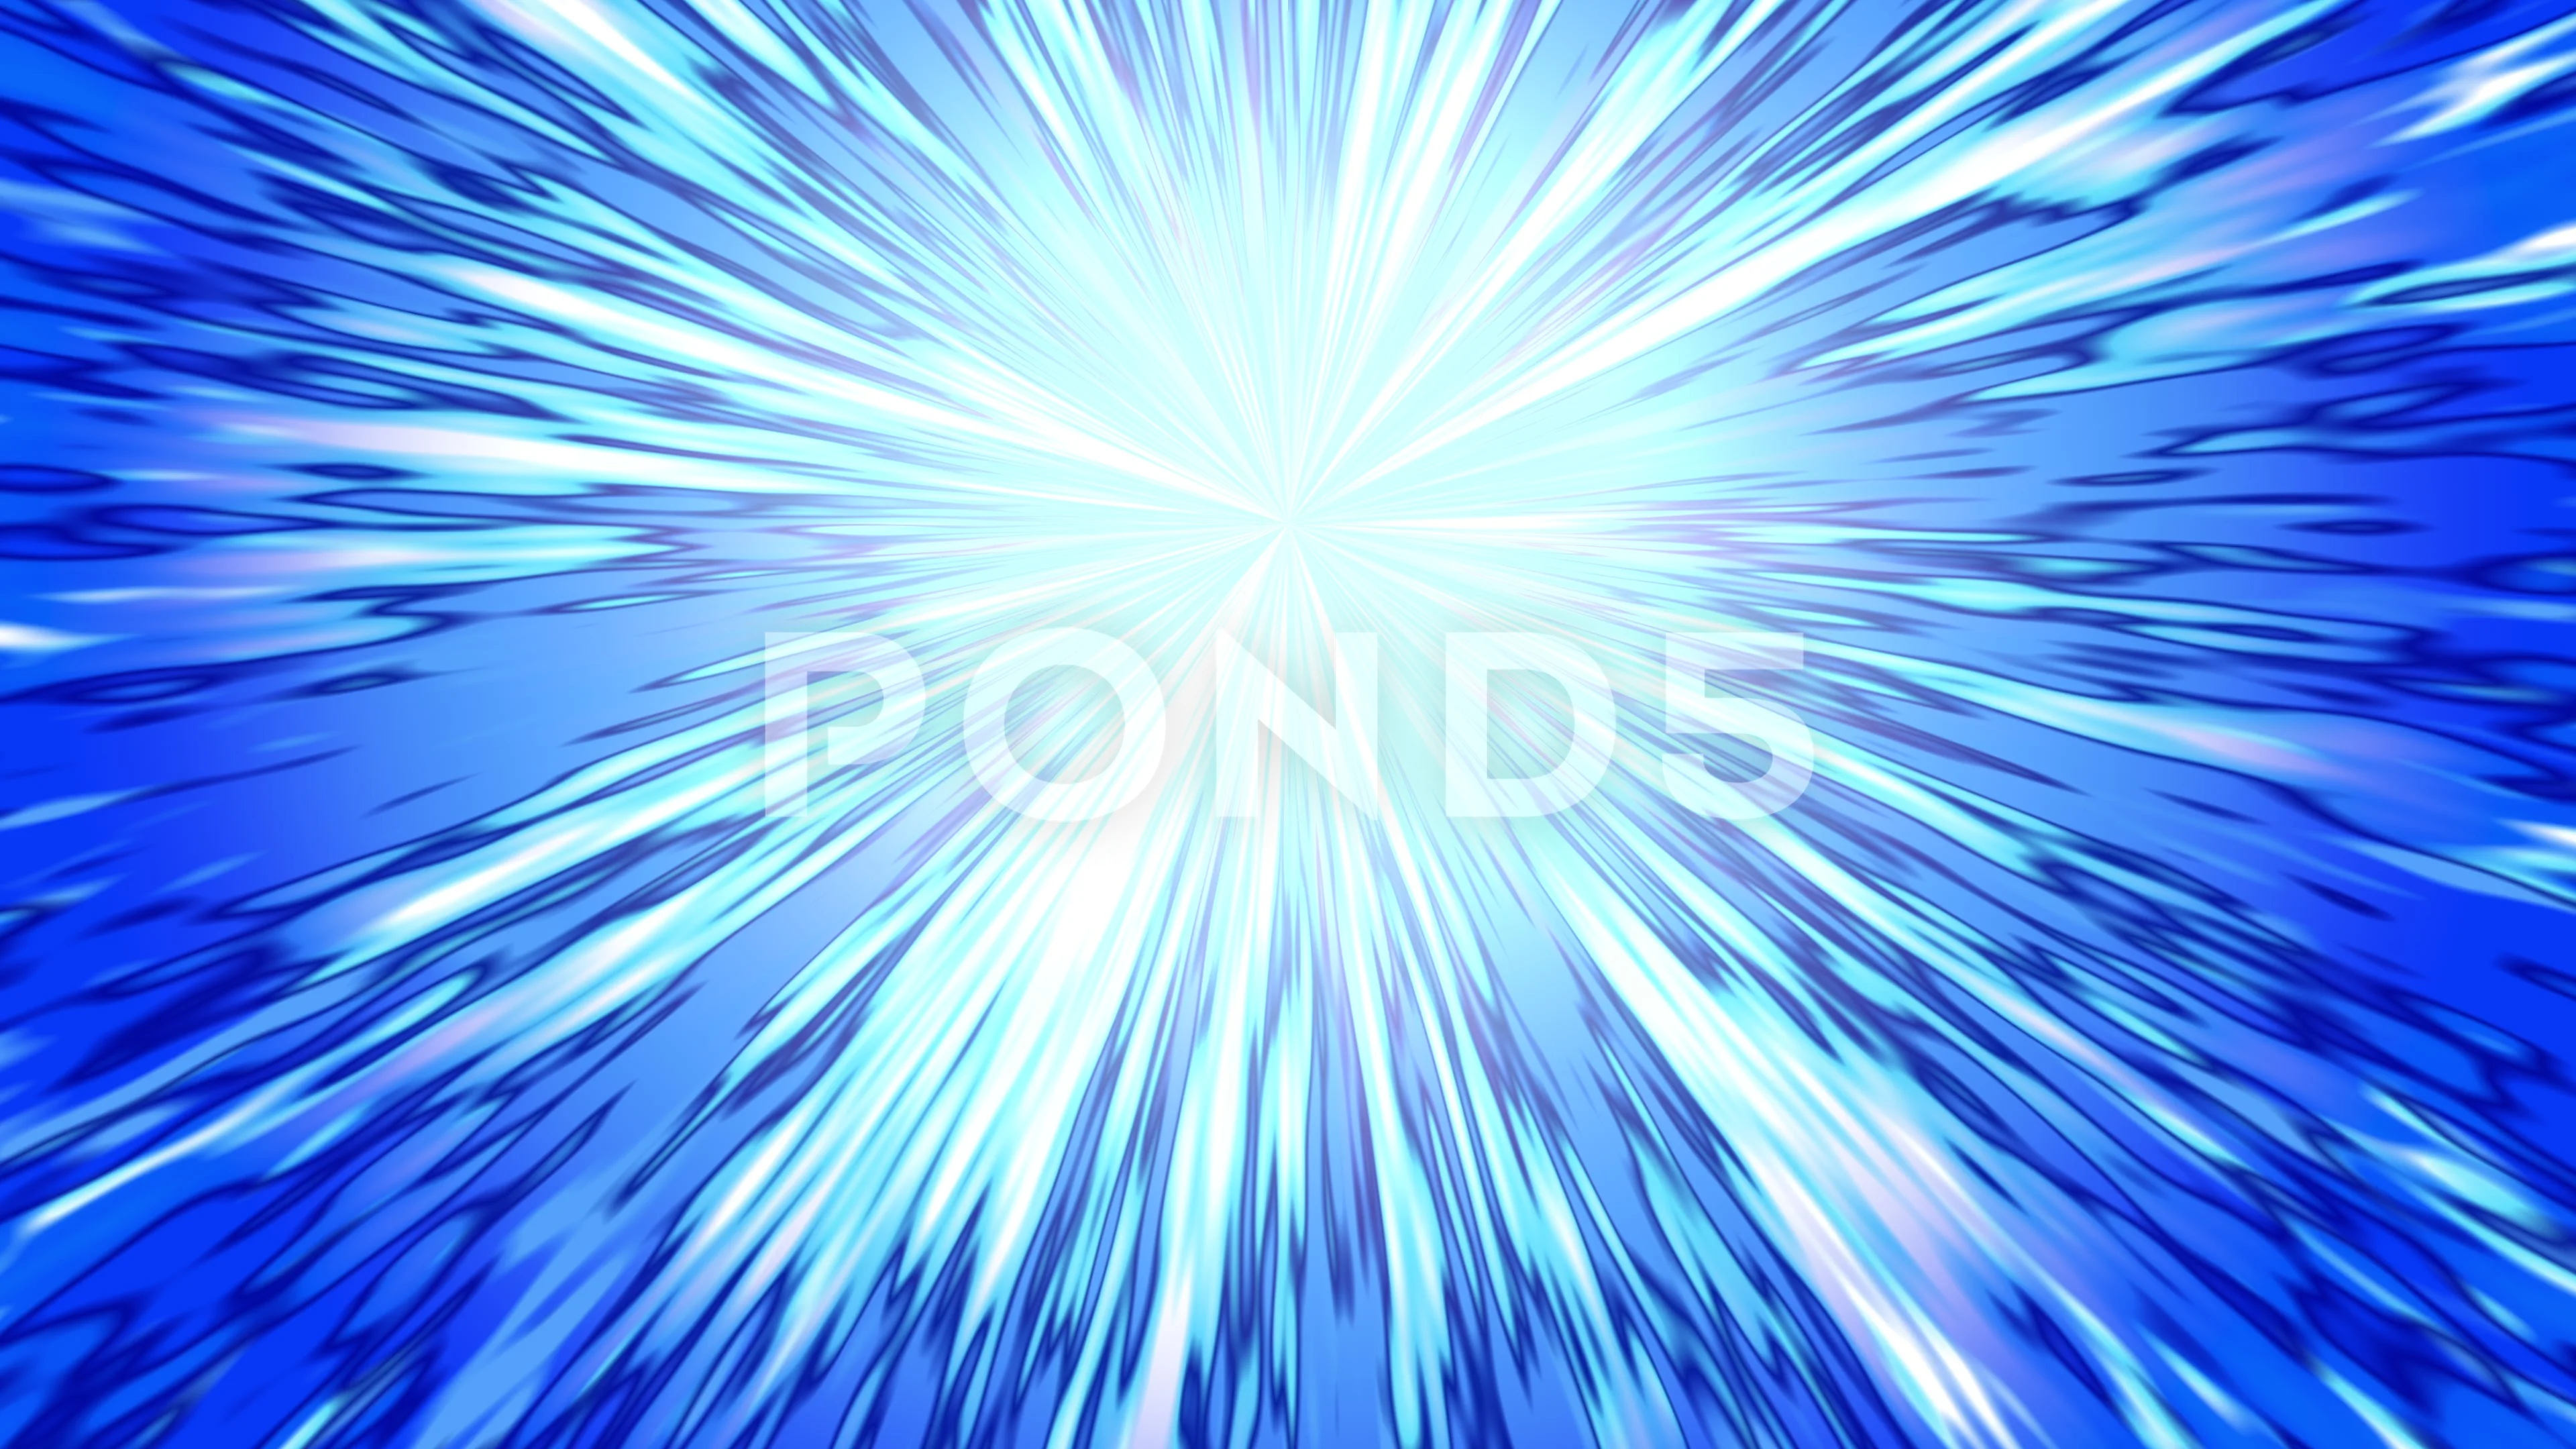 Super Fast Anime Speed Lines Background Animation, Motion Graphics